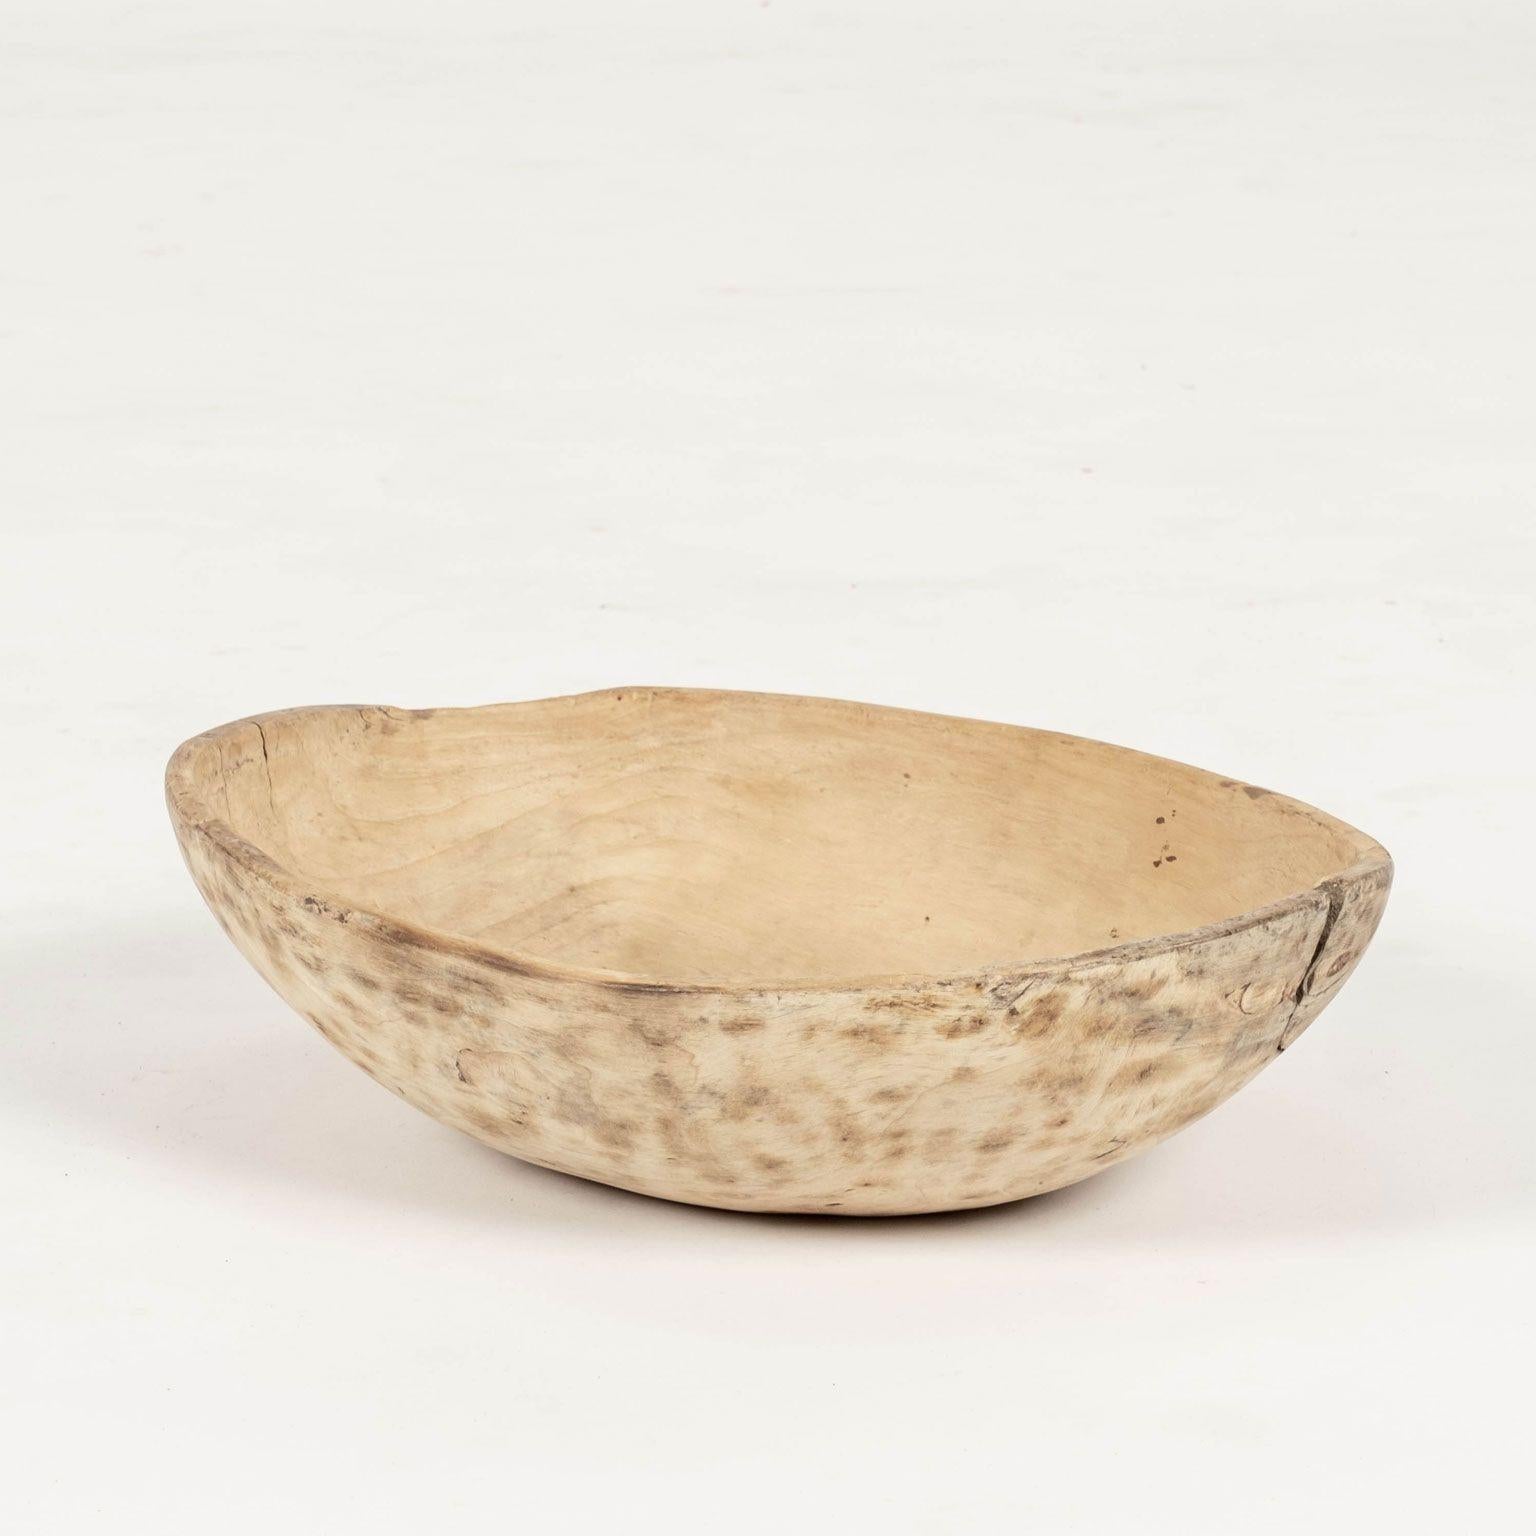 Oval-Shaped Bleached and Scrubbed Rustic Swedish Dugout Bowl For Sale 3